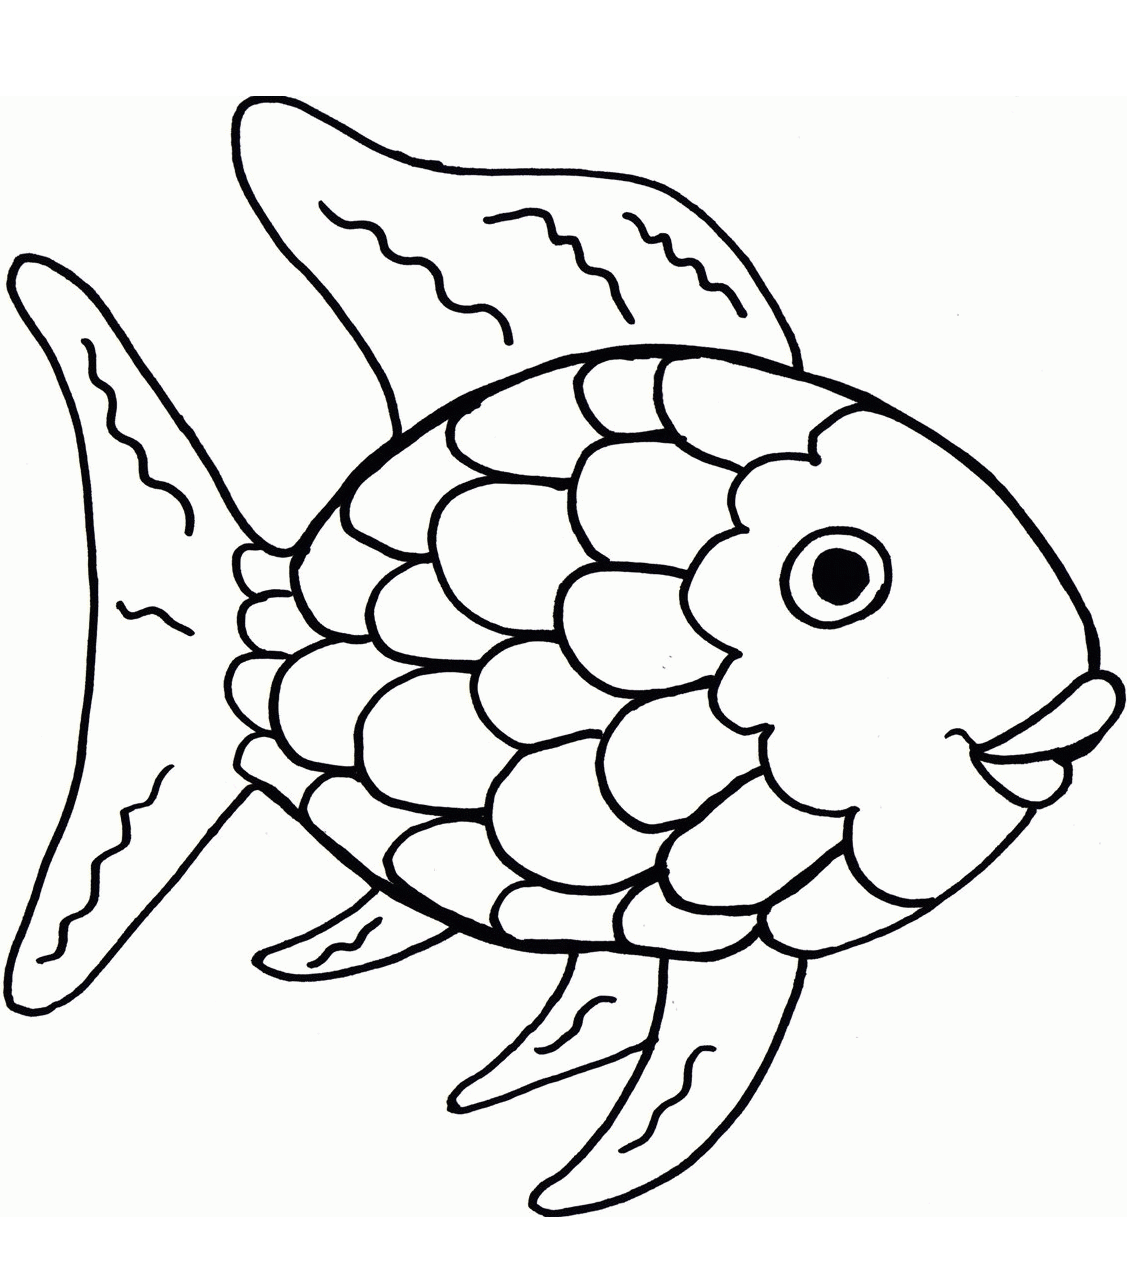 The Rainbow Fish Coloring Page